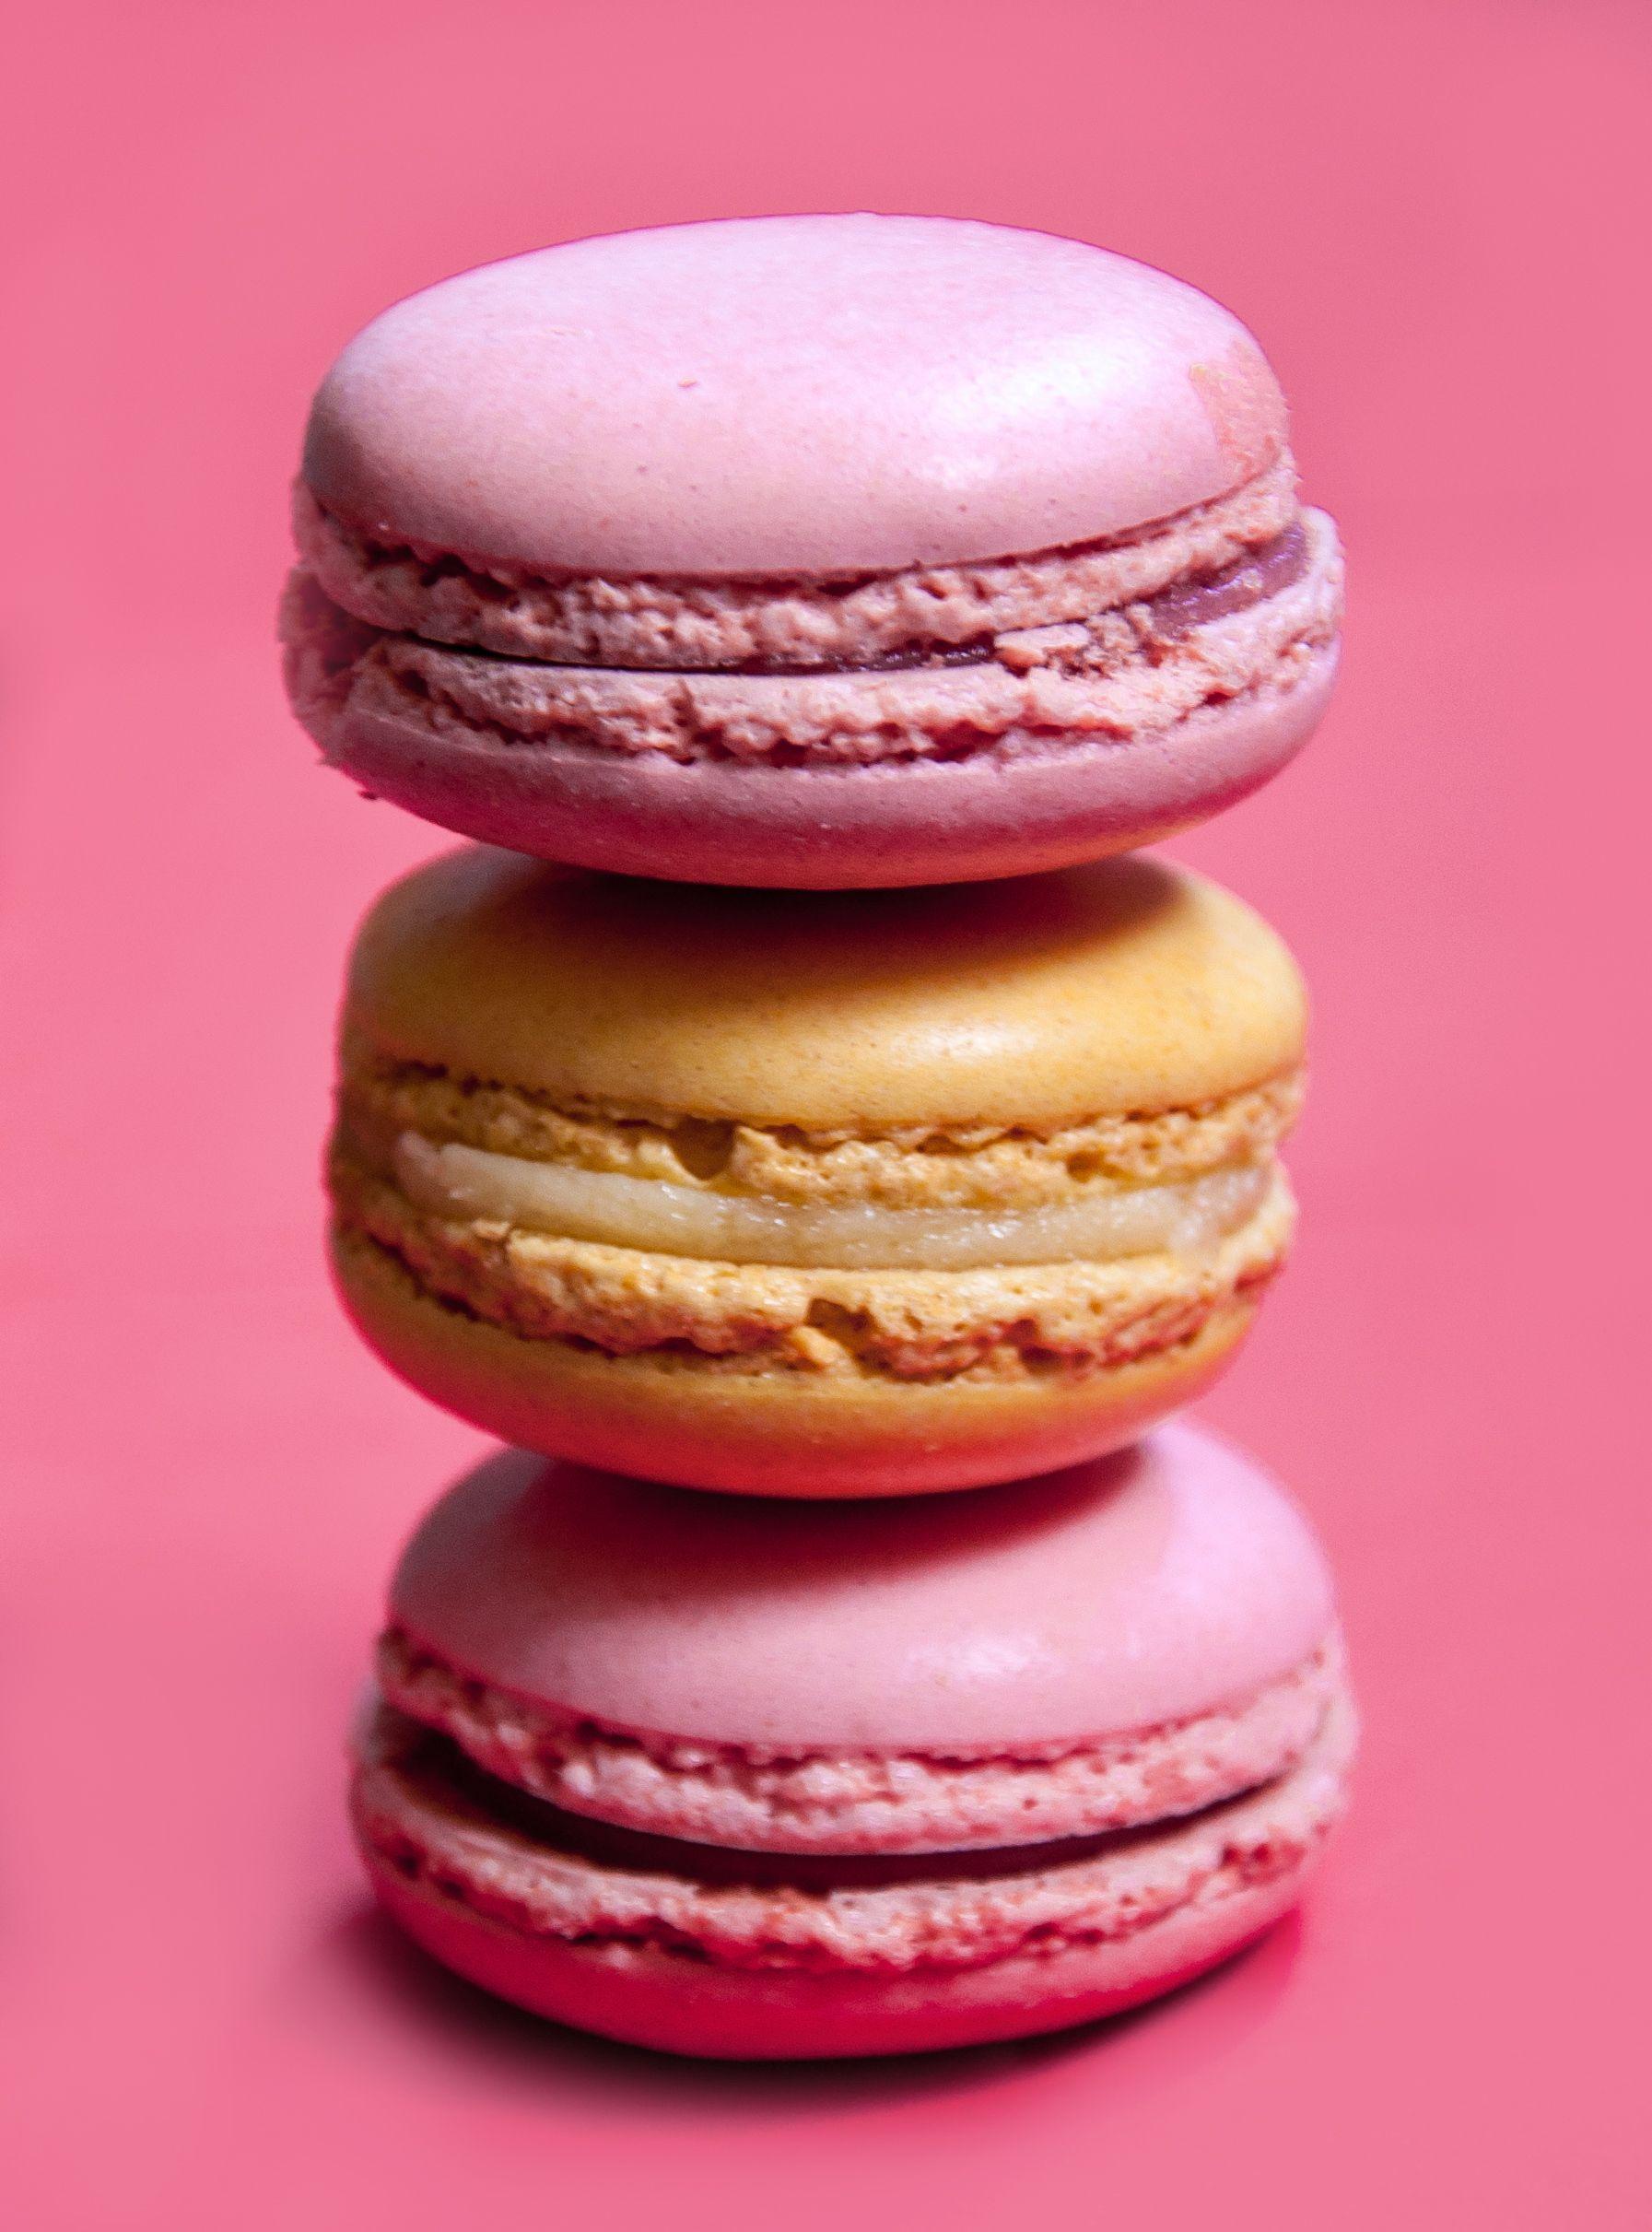 Free photo: French macaroons dessert cookies, object